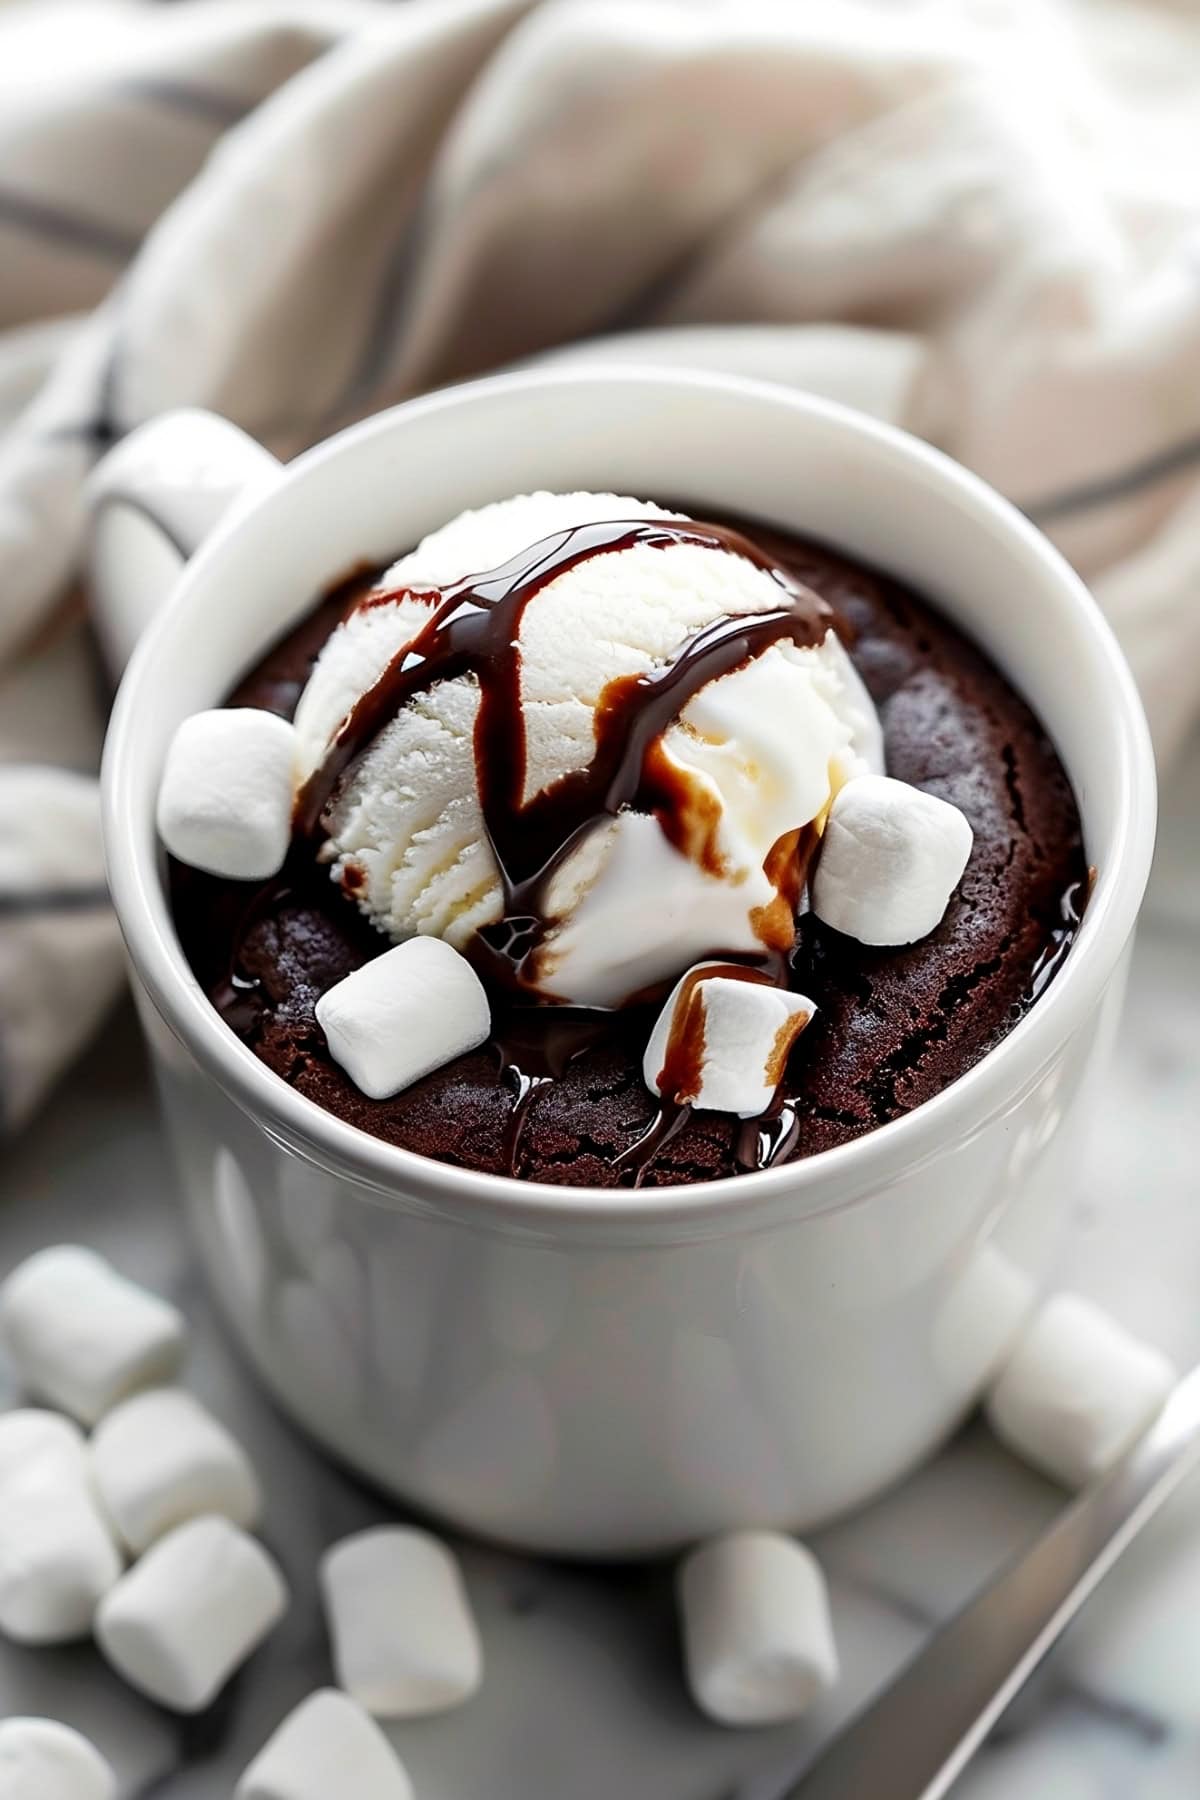 Gooey hot chocolate mug cake, topped with mini marshmallows, ice cream and a drizzle of chocolate syrup.